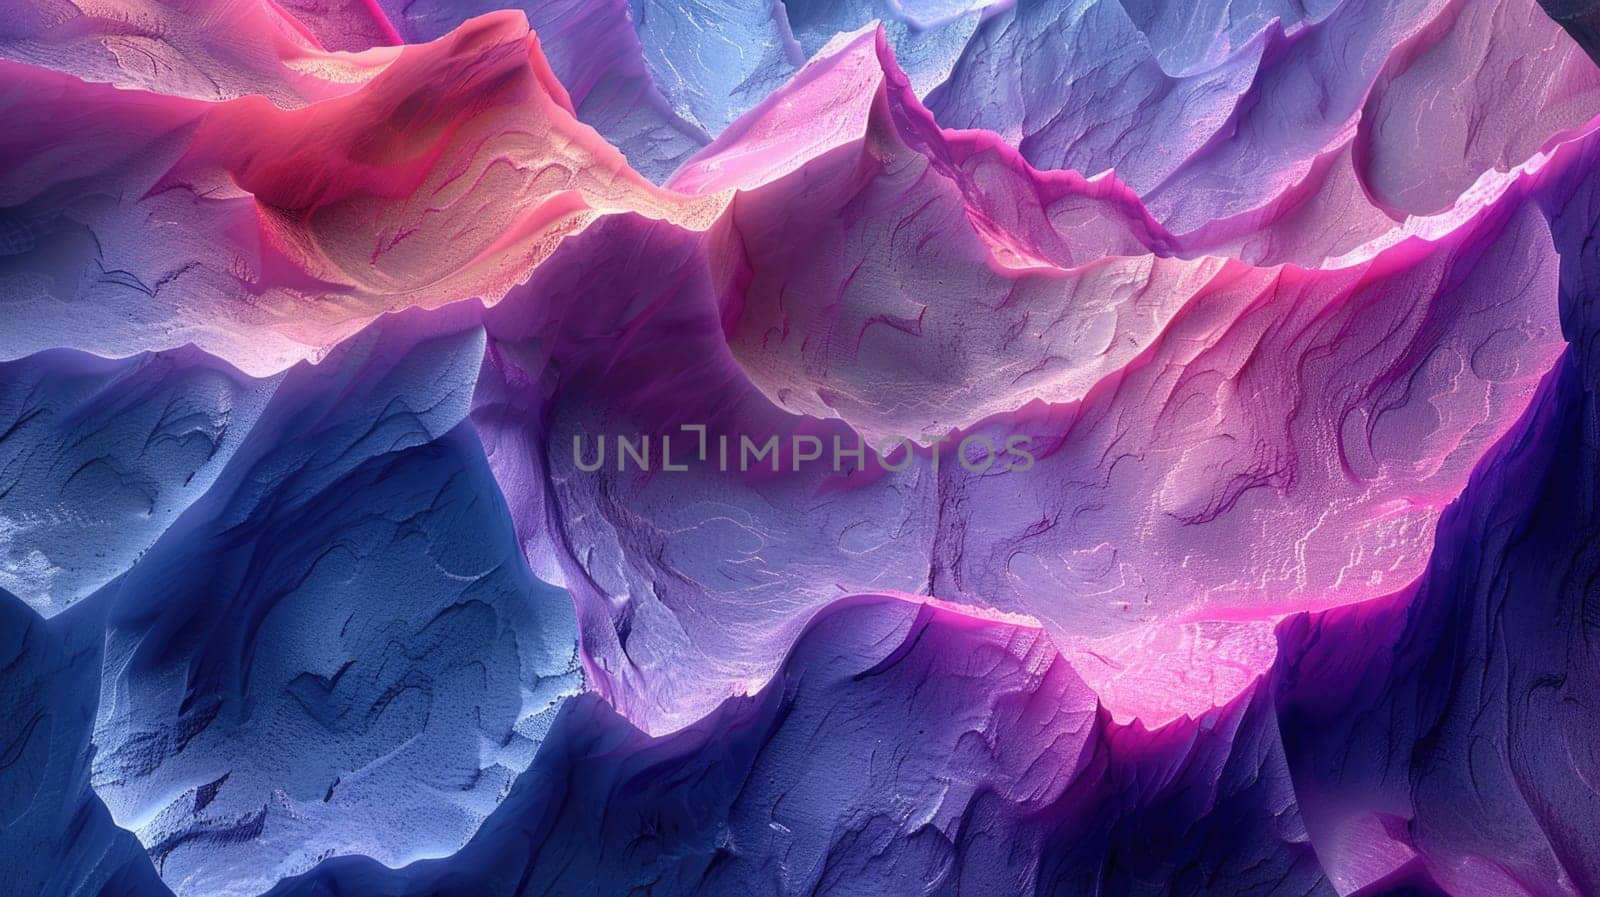 A detailed close-up view of a striking and colorful rock formation.